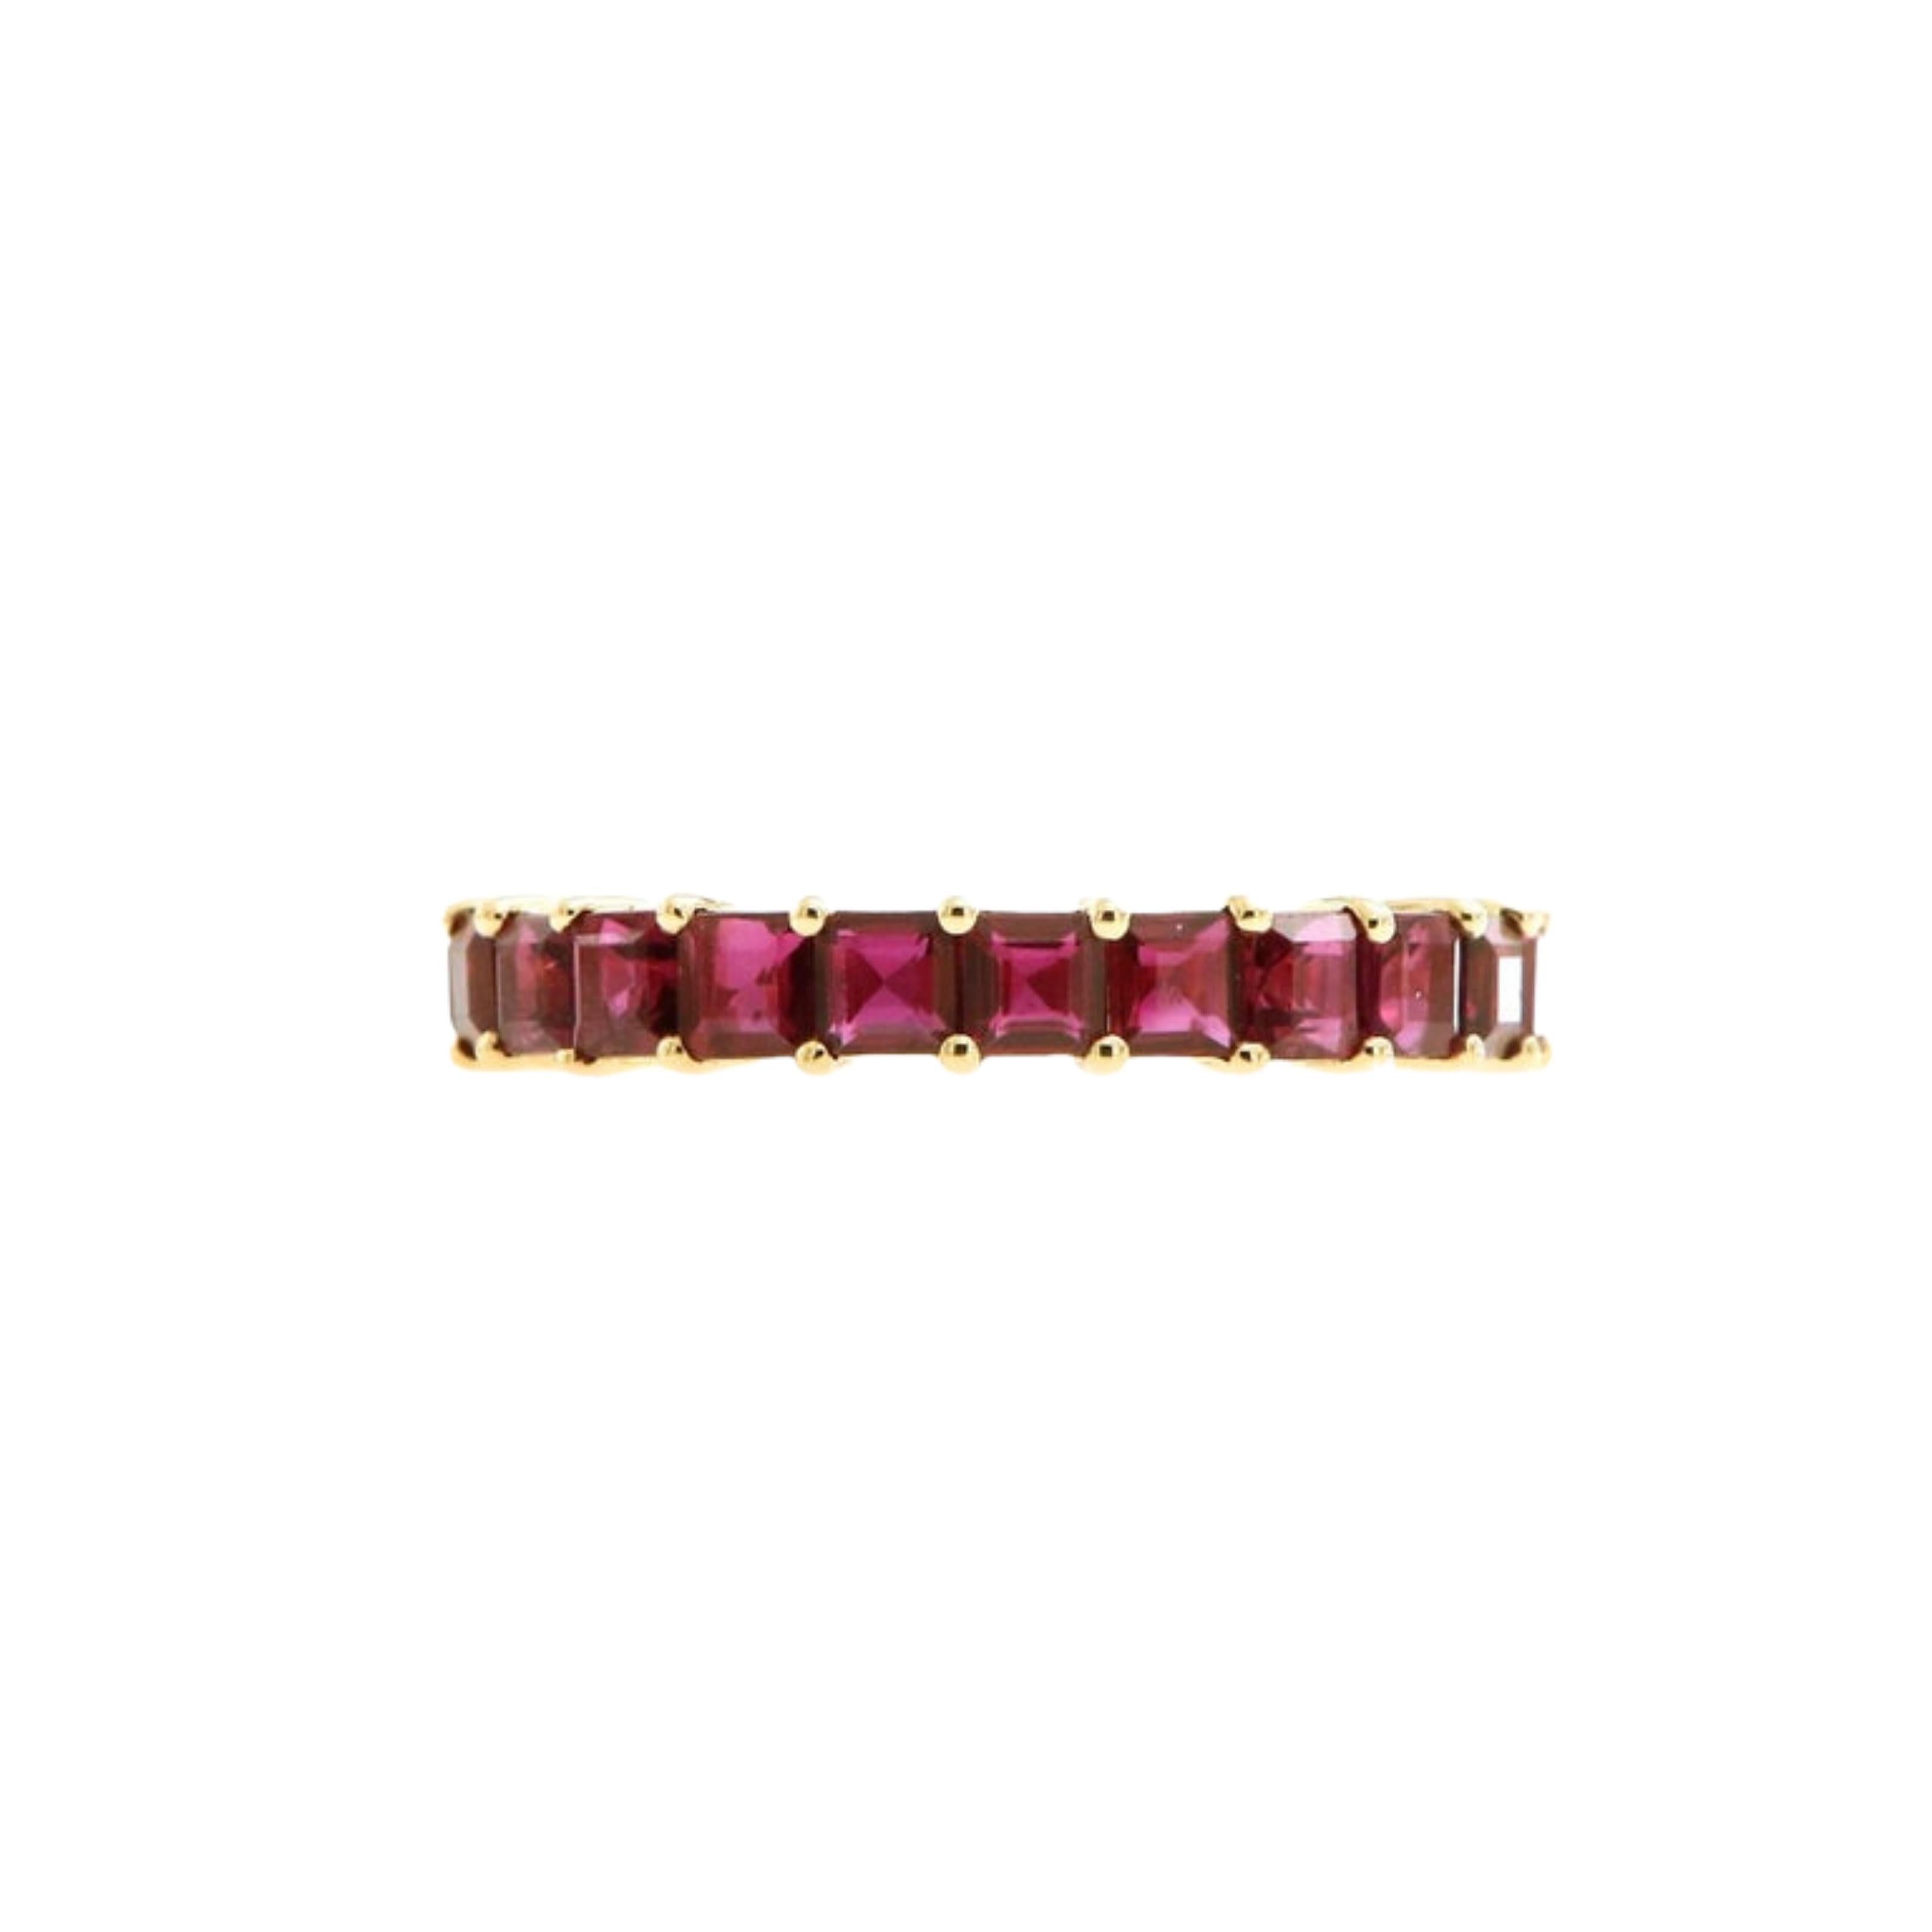 This eternity band is made from 18k yellow gold and carefully selected clean heated rubies from Thailand. The rubies are 2.9mm in size totalling 4.16 carats and is delicately set into a high polished eternity band setting. 

This ring is in a size